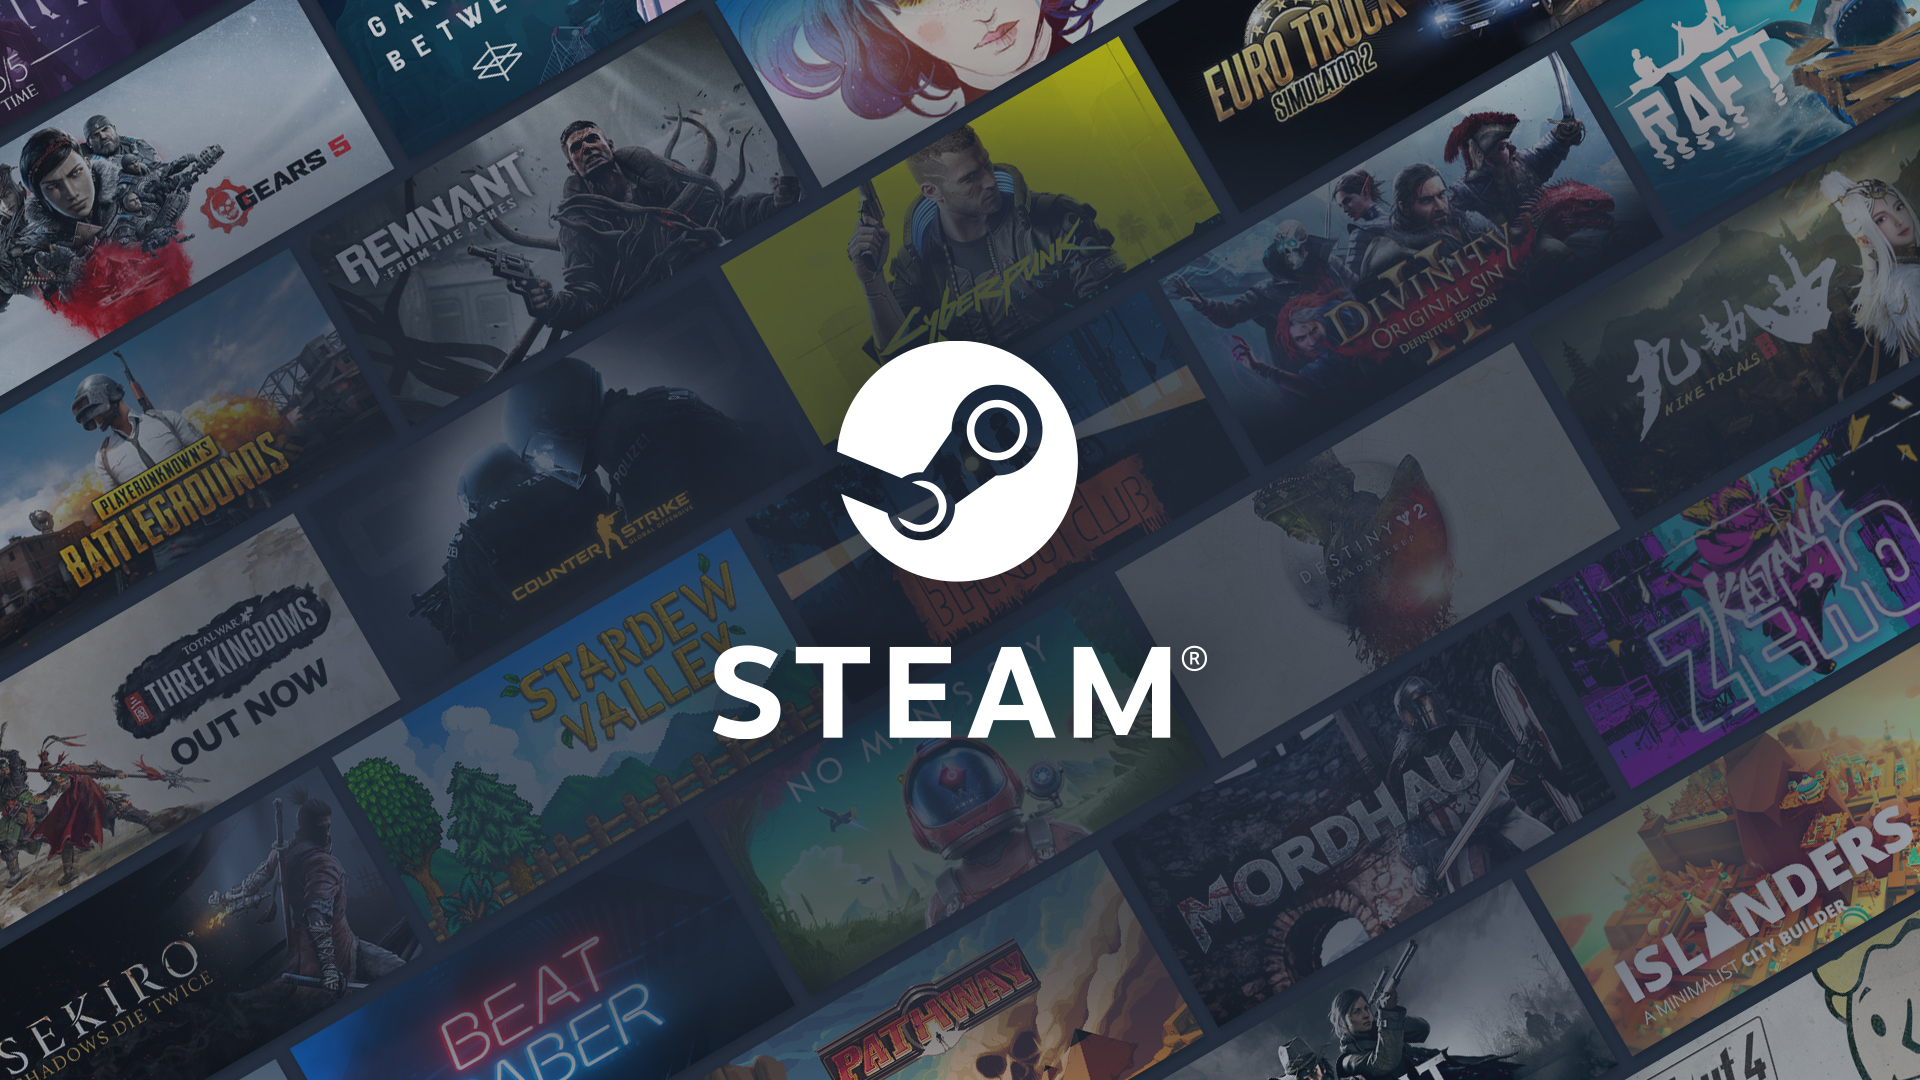 Windows 11 gains popularity on Steam, but most prefer Windows 10